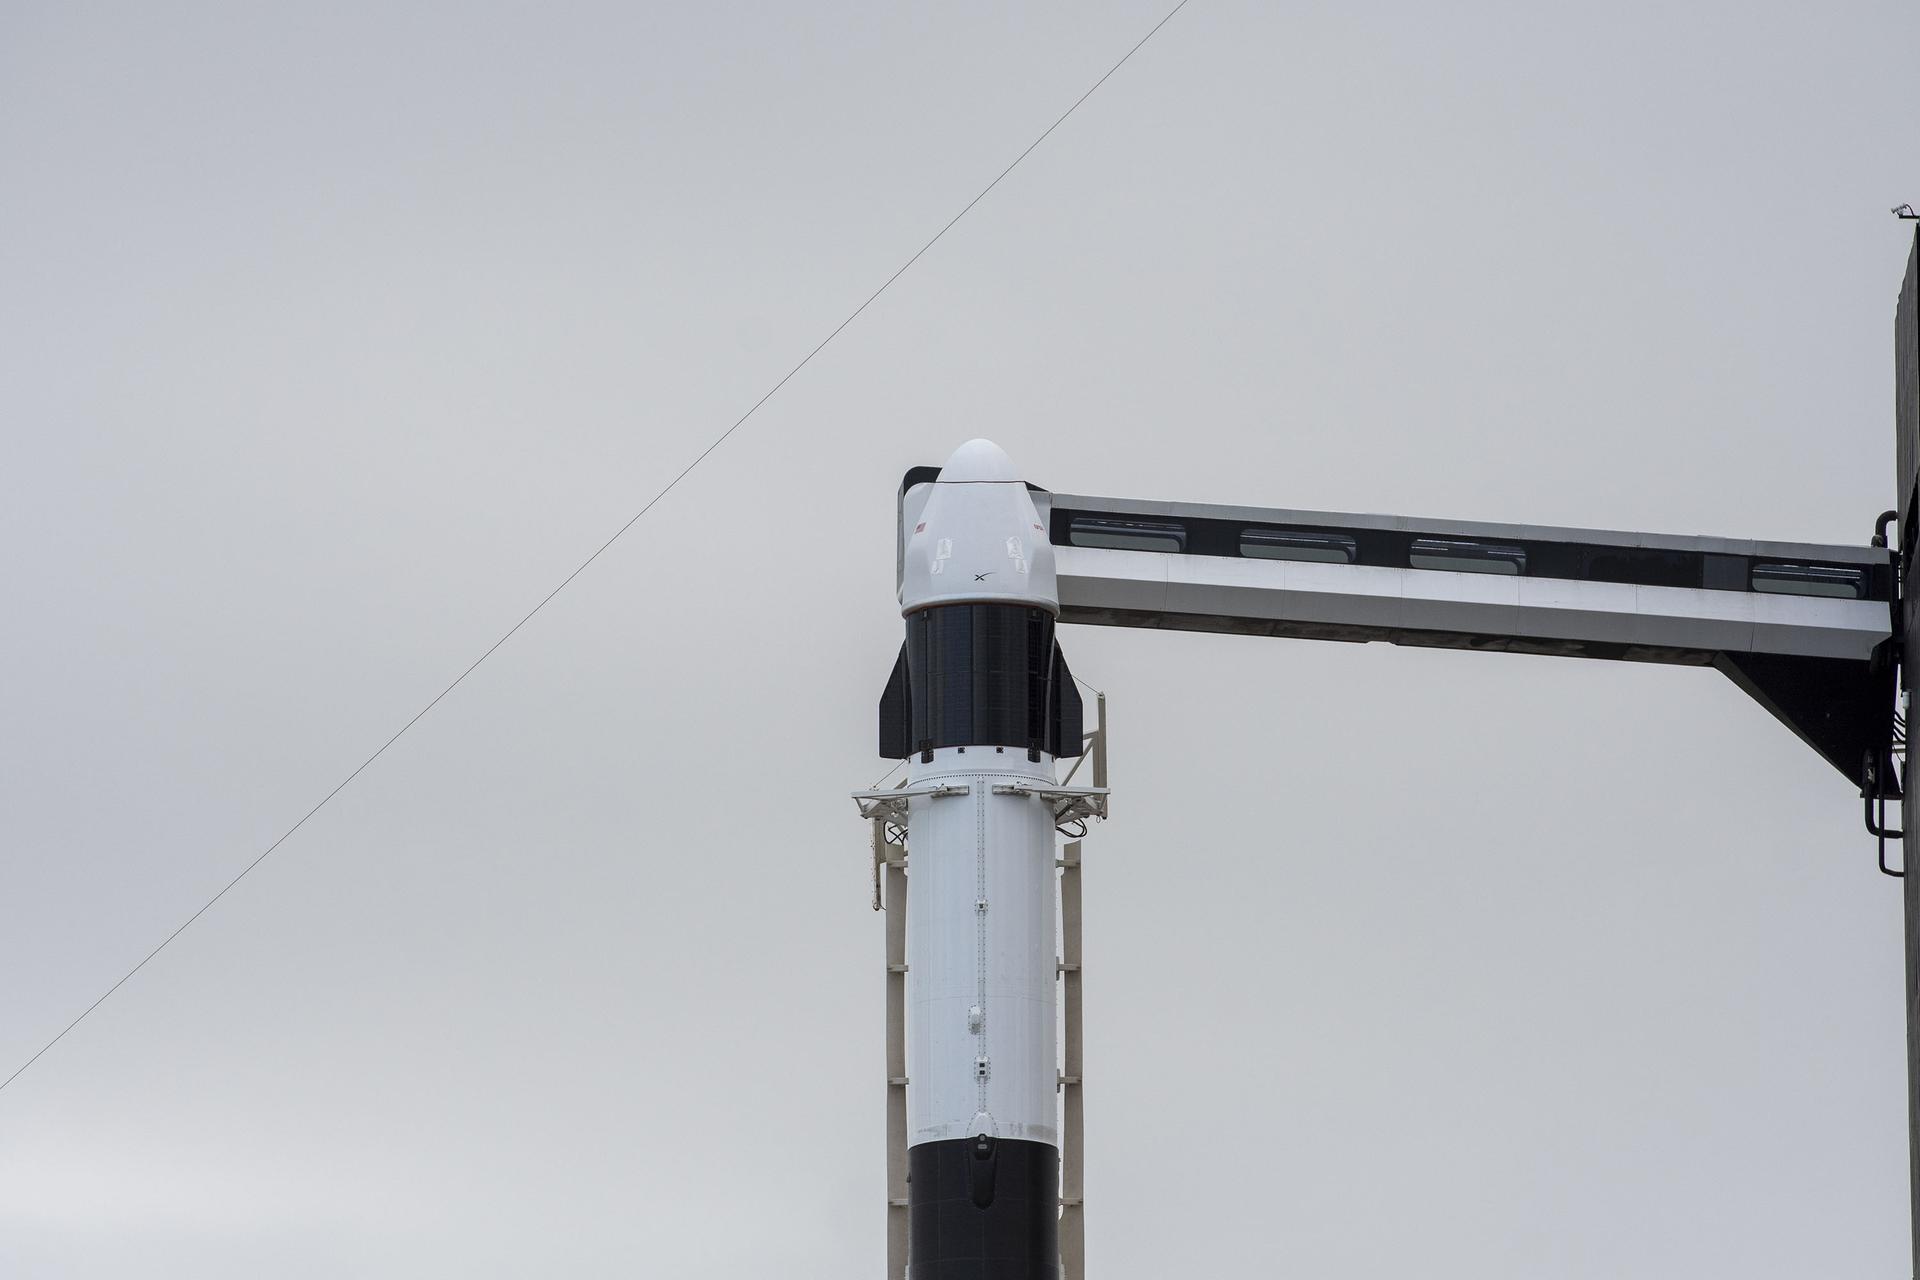 Seen here is the SpaceX Dragon cargo spacecraft atop the company's Falcon 9 rocket after being raised to a vertical position at NASA's Kennedy Space Center in Florida on Nov. 21, 2022, in preparation for the 26th commercial resupply services launch to the International Space Station. The mission will deliver new science investigations, supplies, and equipment to the crew aboard the space station, including the next pair of ISS Roll Out Solar Arrays (iROSAs).